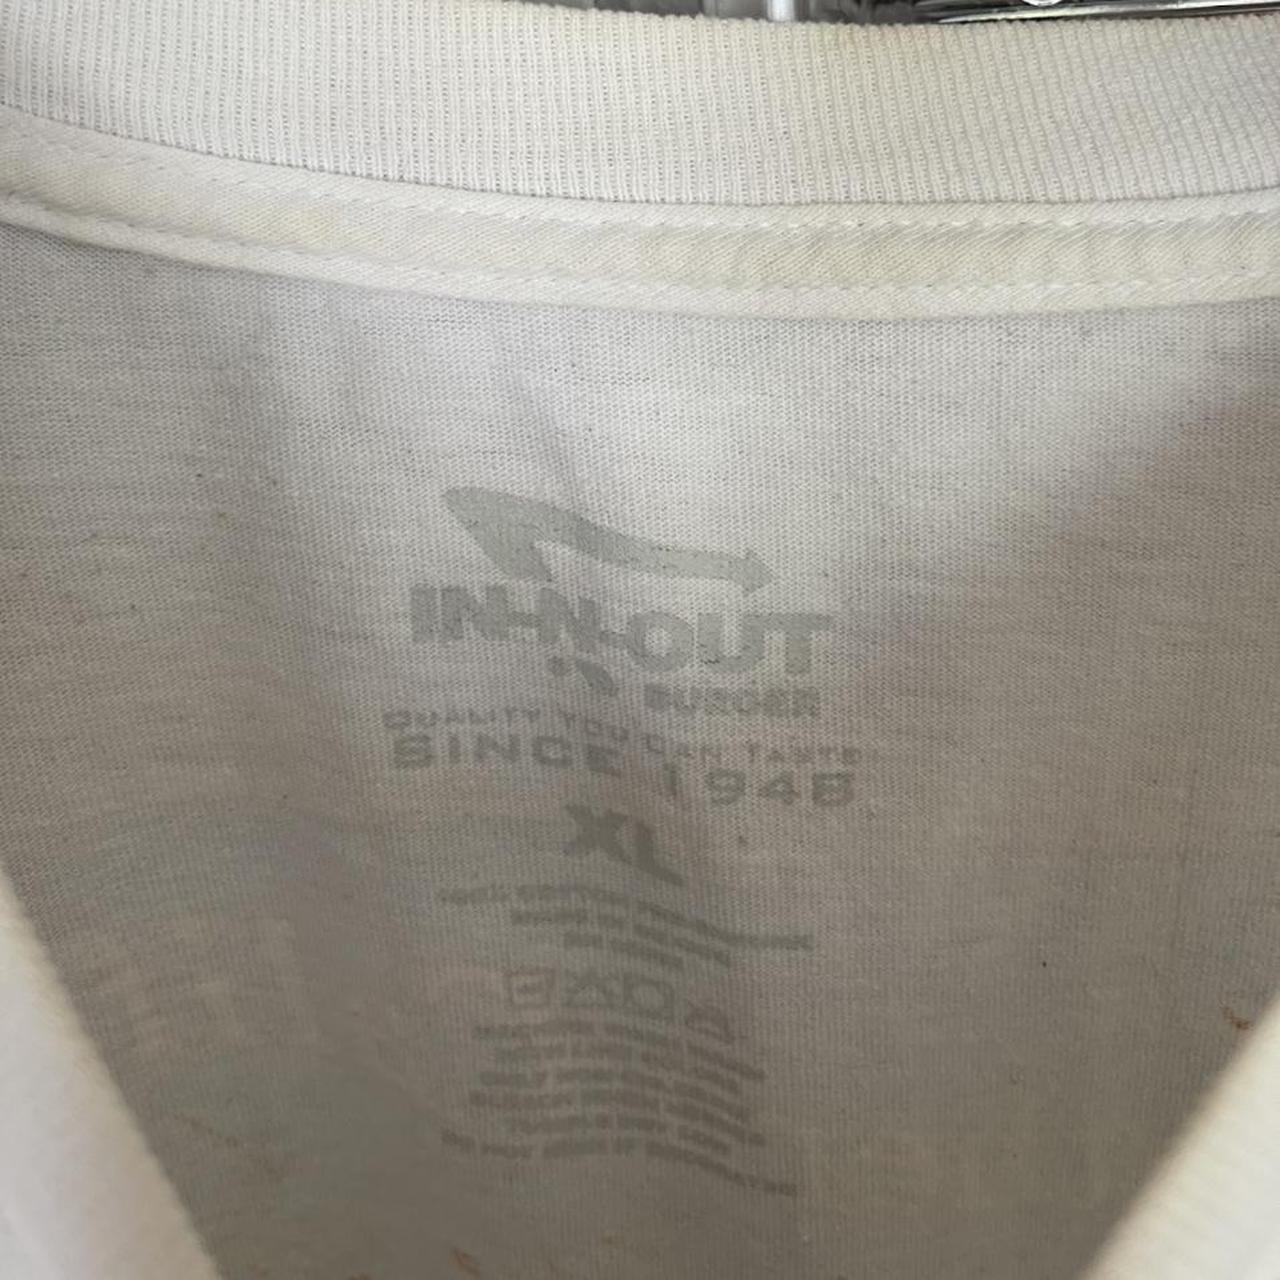 Vintage In N Out Burger Southern California white... - Depop